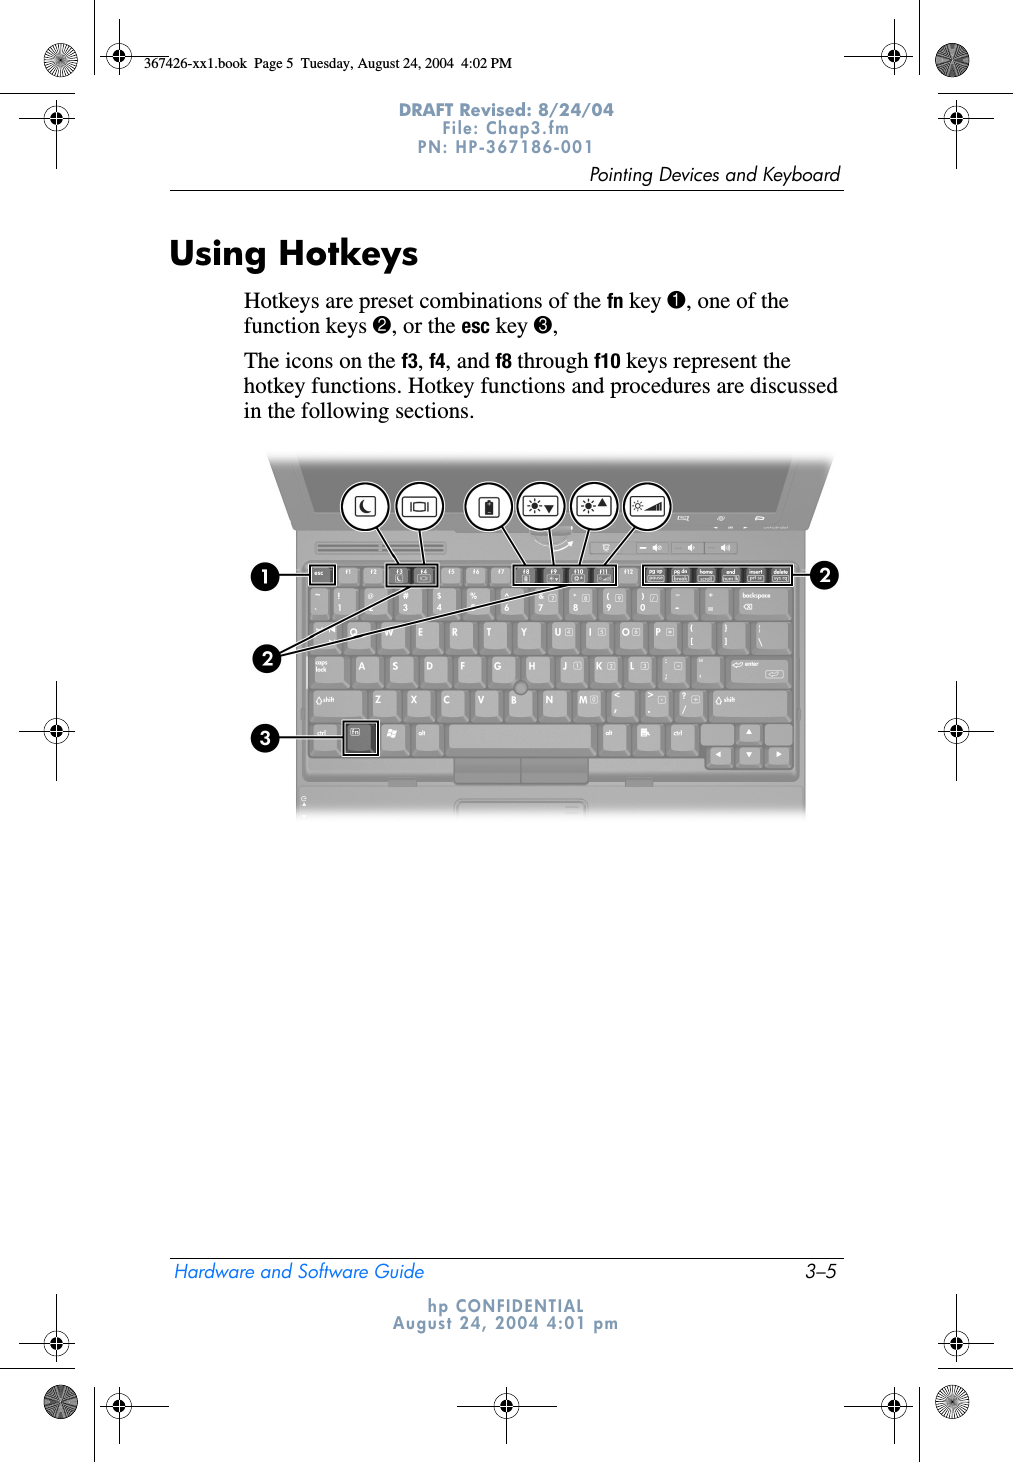 Pointing Devices and KeyboardHardware and Software Guide 3–5DRAFT Revised: 8/24/04File: Chap3.fm PN: HP-367186-001 hp CONFIDENTIALAugust 24, 2004 4:01 pmUsing HotkeysHotkeys are preset combinations of the fn key 1, one of the function keys 2, or the esc key 3, The icons on the f3, f4, and f8 through f10 keys represent the hotkey functions. Hotkey functions and procedures are discussed in the following sections.367426-xx1.book  Page 5  Tuesday, August 24, 2004  4:02 PM